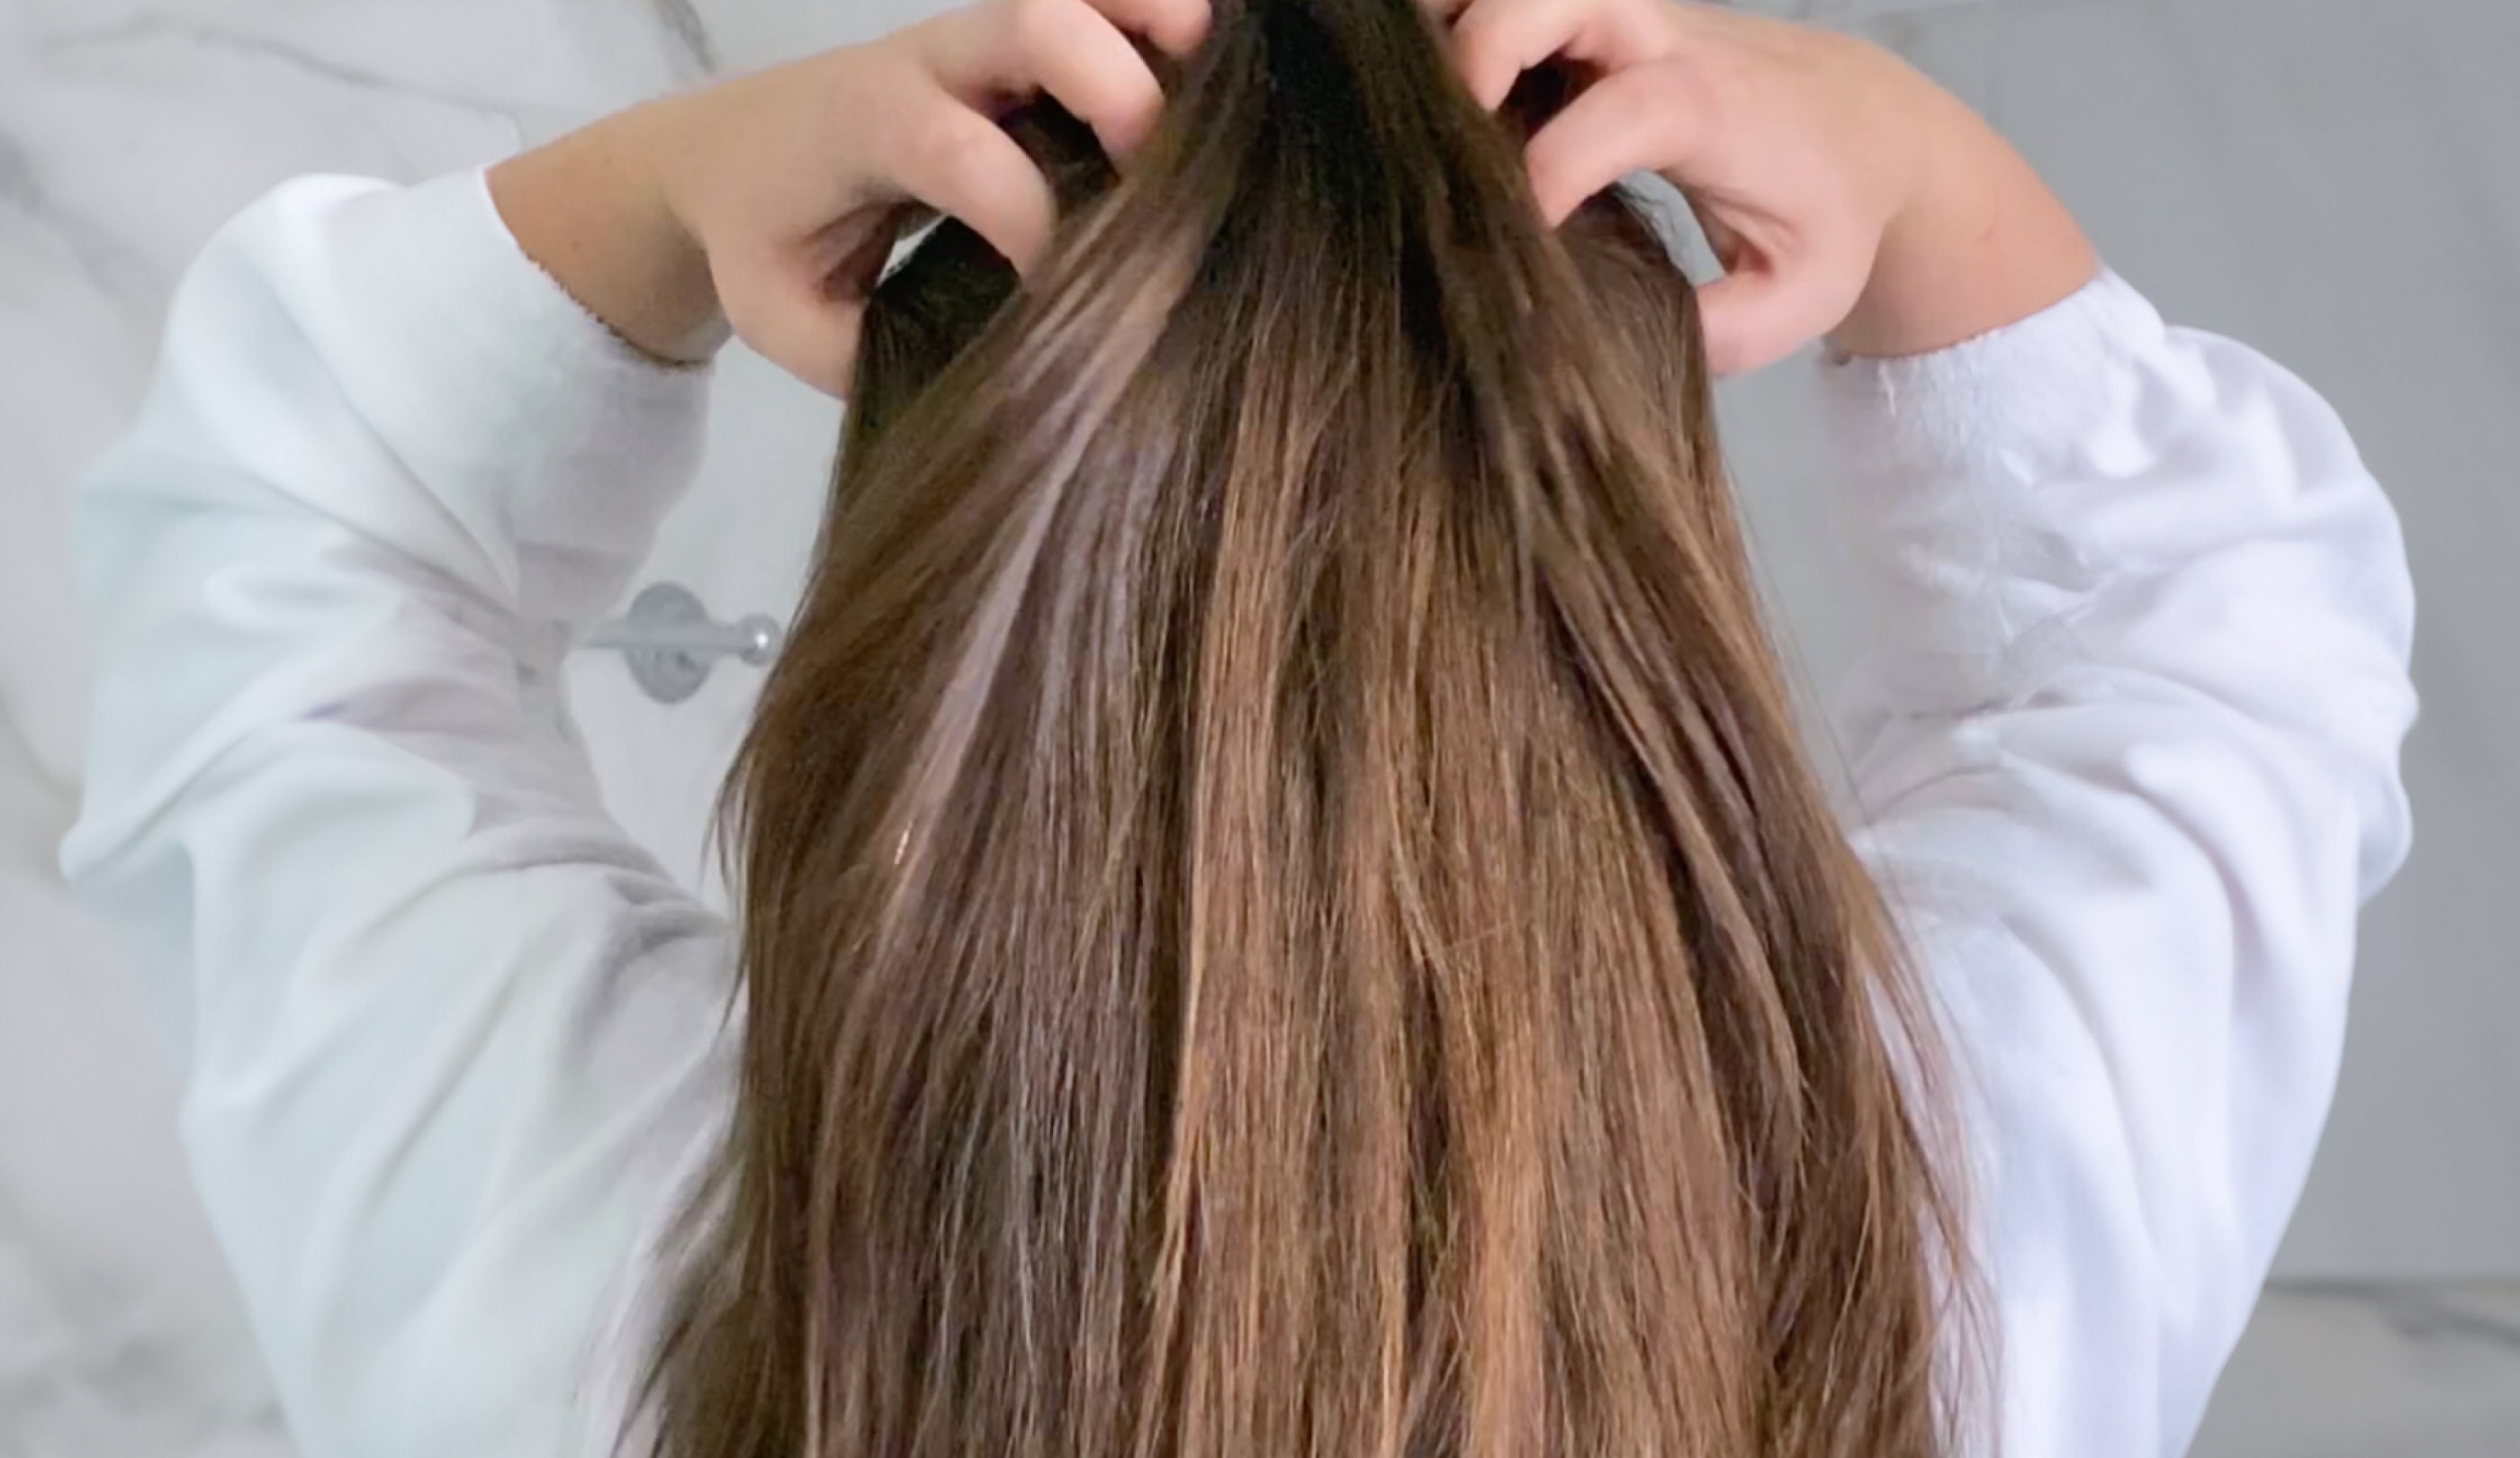 Brunette woman runs her hands through her long, shiny and healthy looking hair.